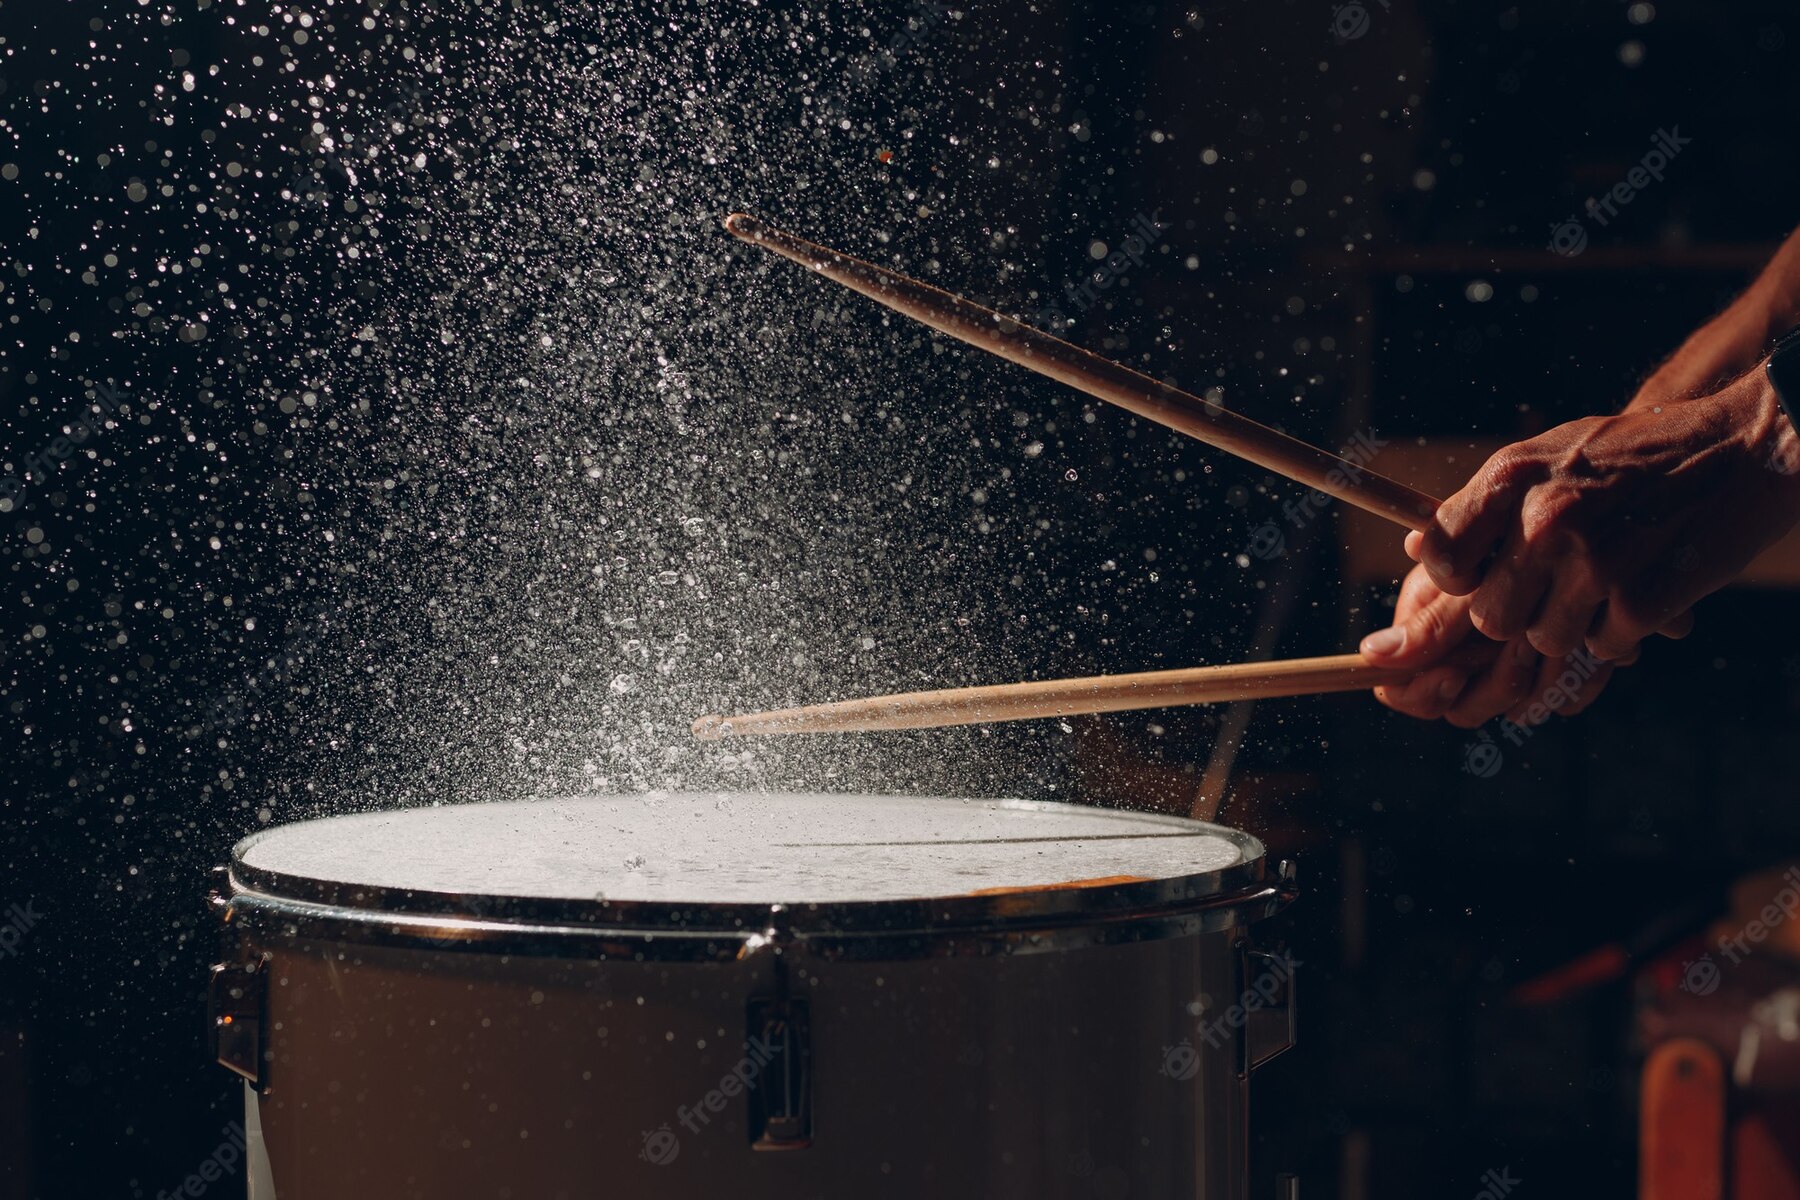 Improve your rhythm skills to make practice easier